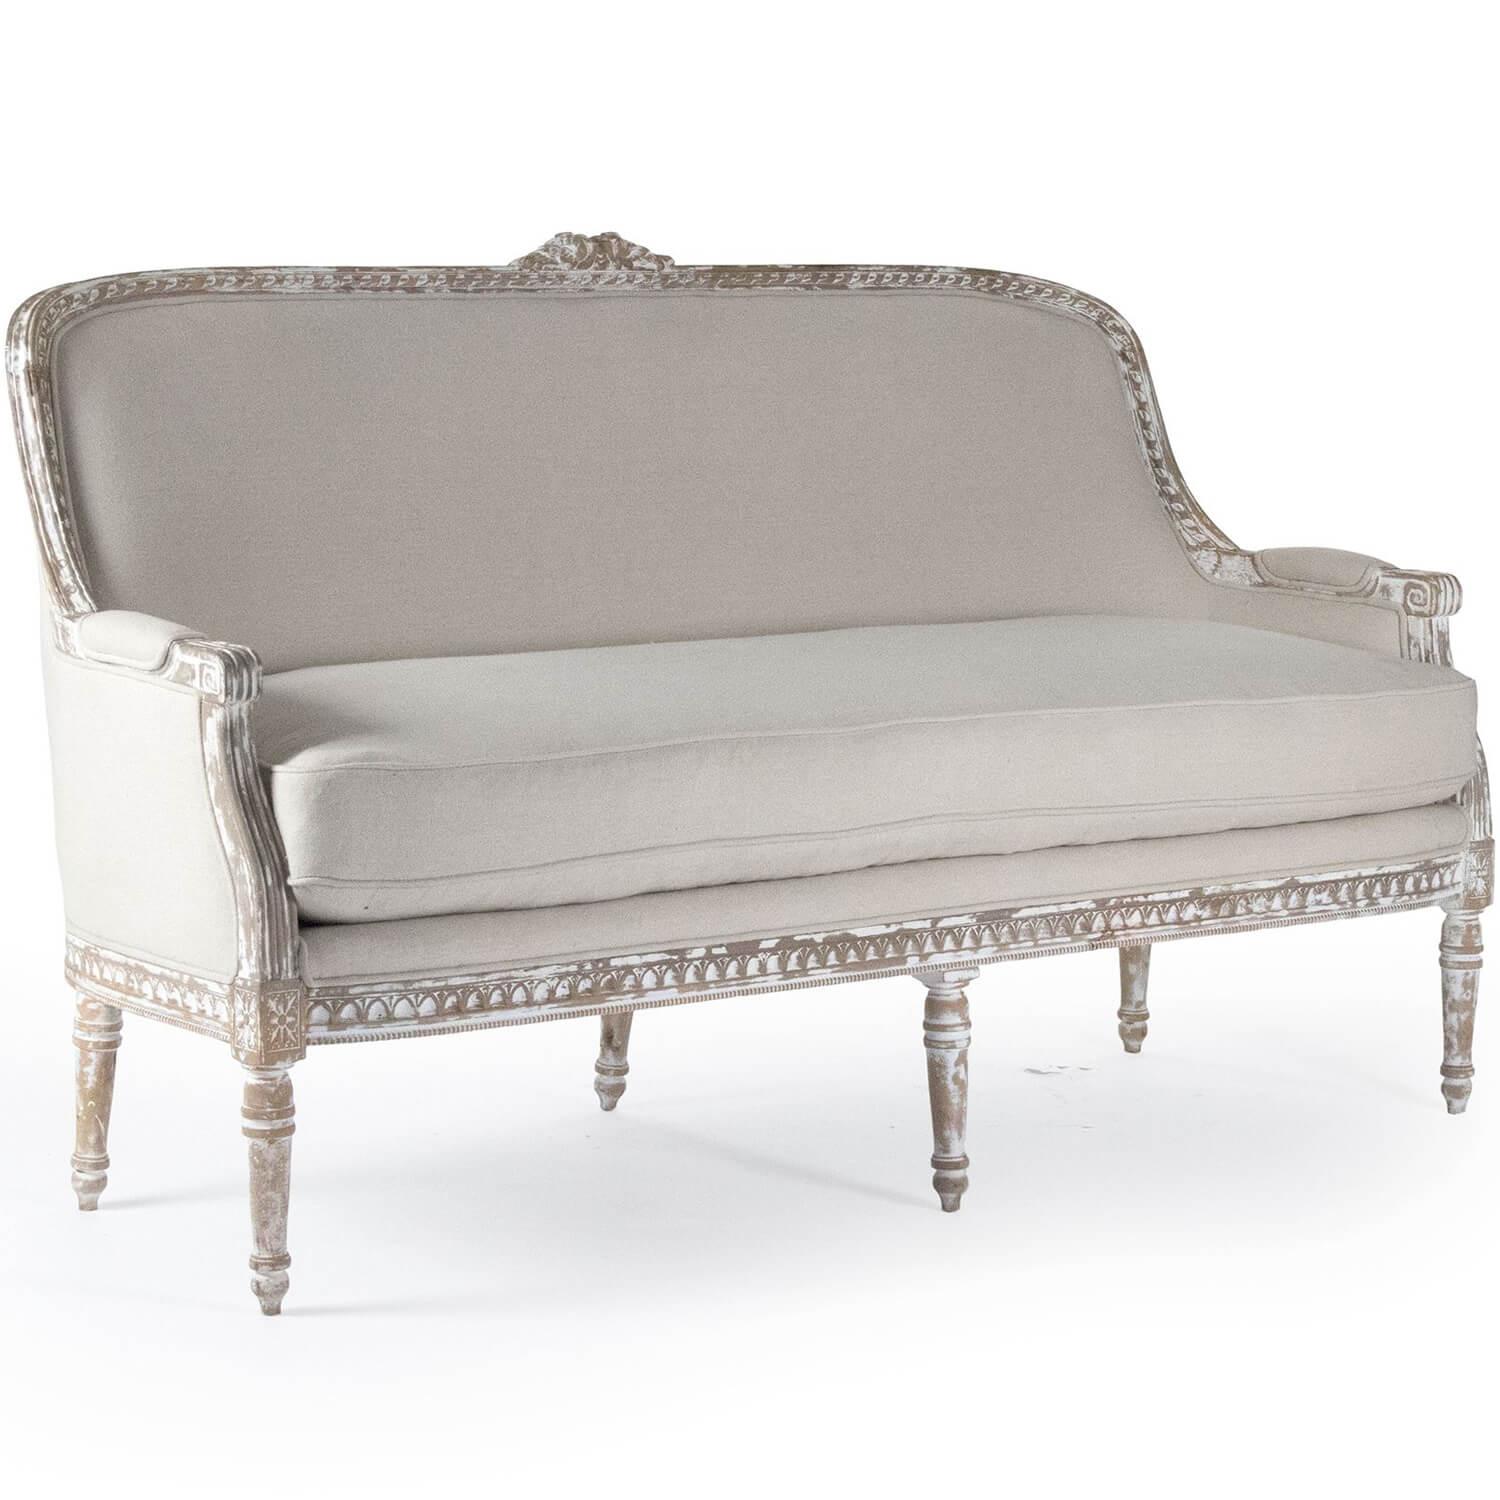 Distressed French Chic Settee - Belle Escape